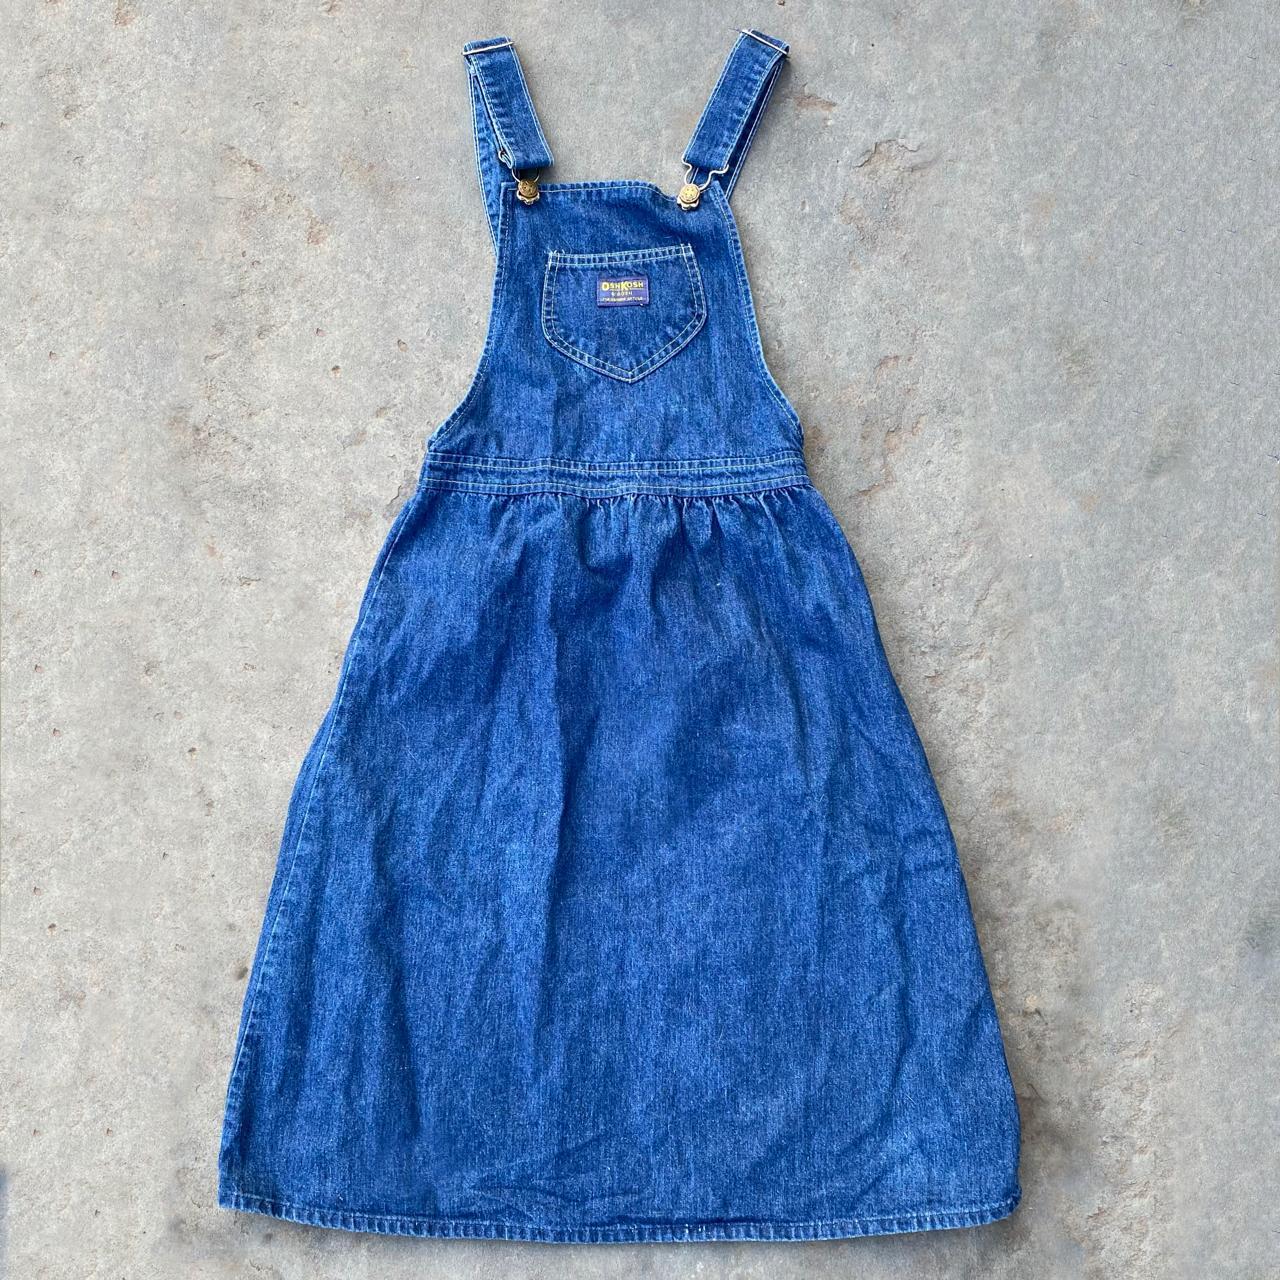 CONVERT OLD JEANS TO DUNGAREE DRESS - YouTube